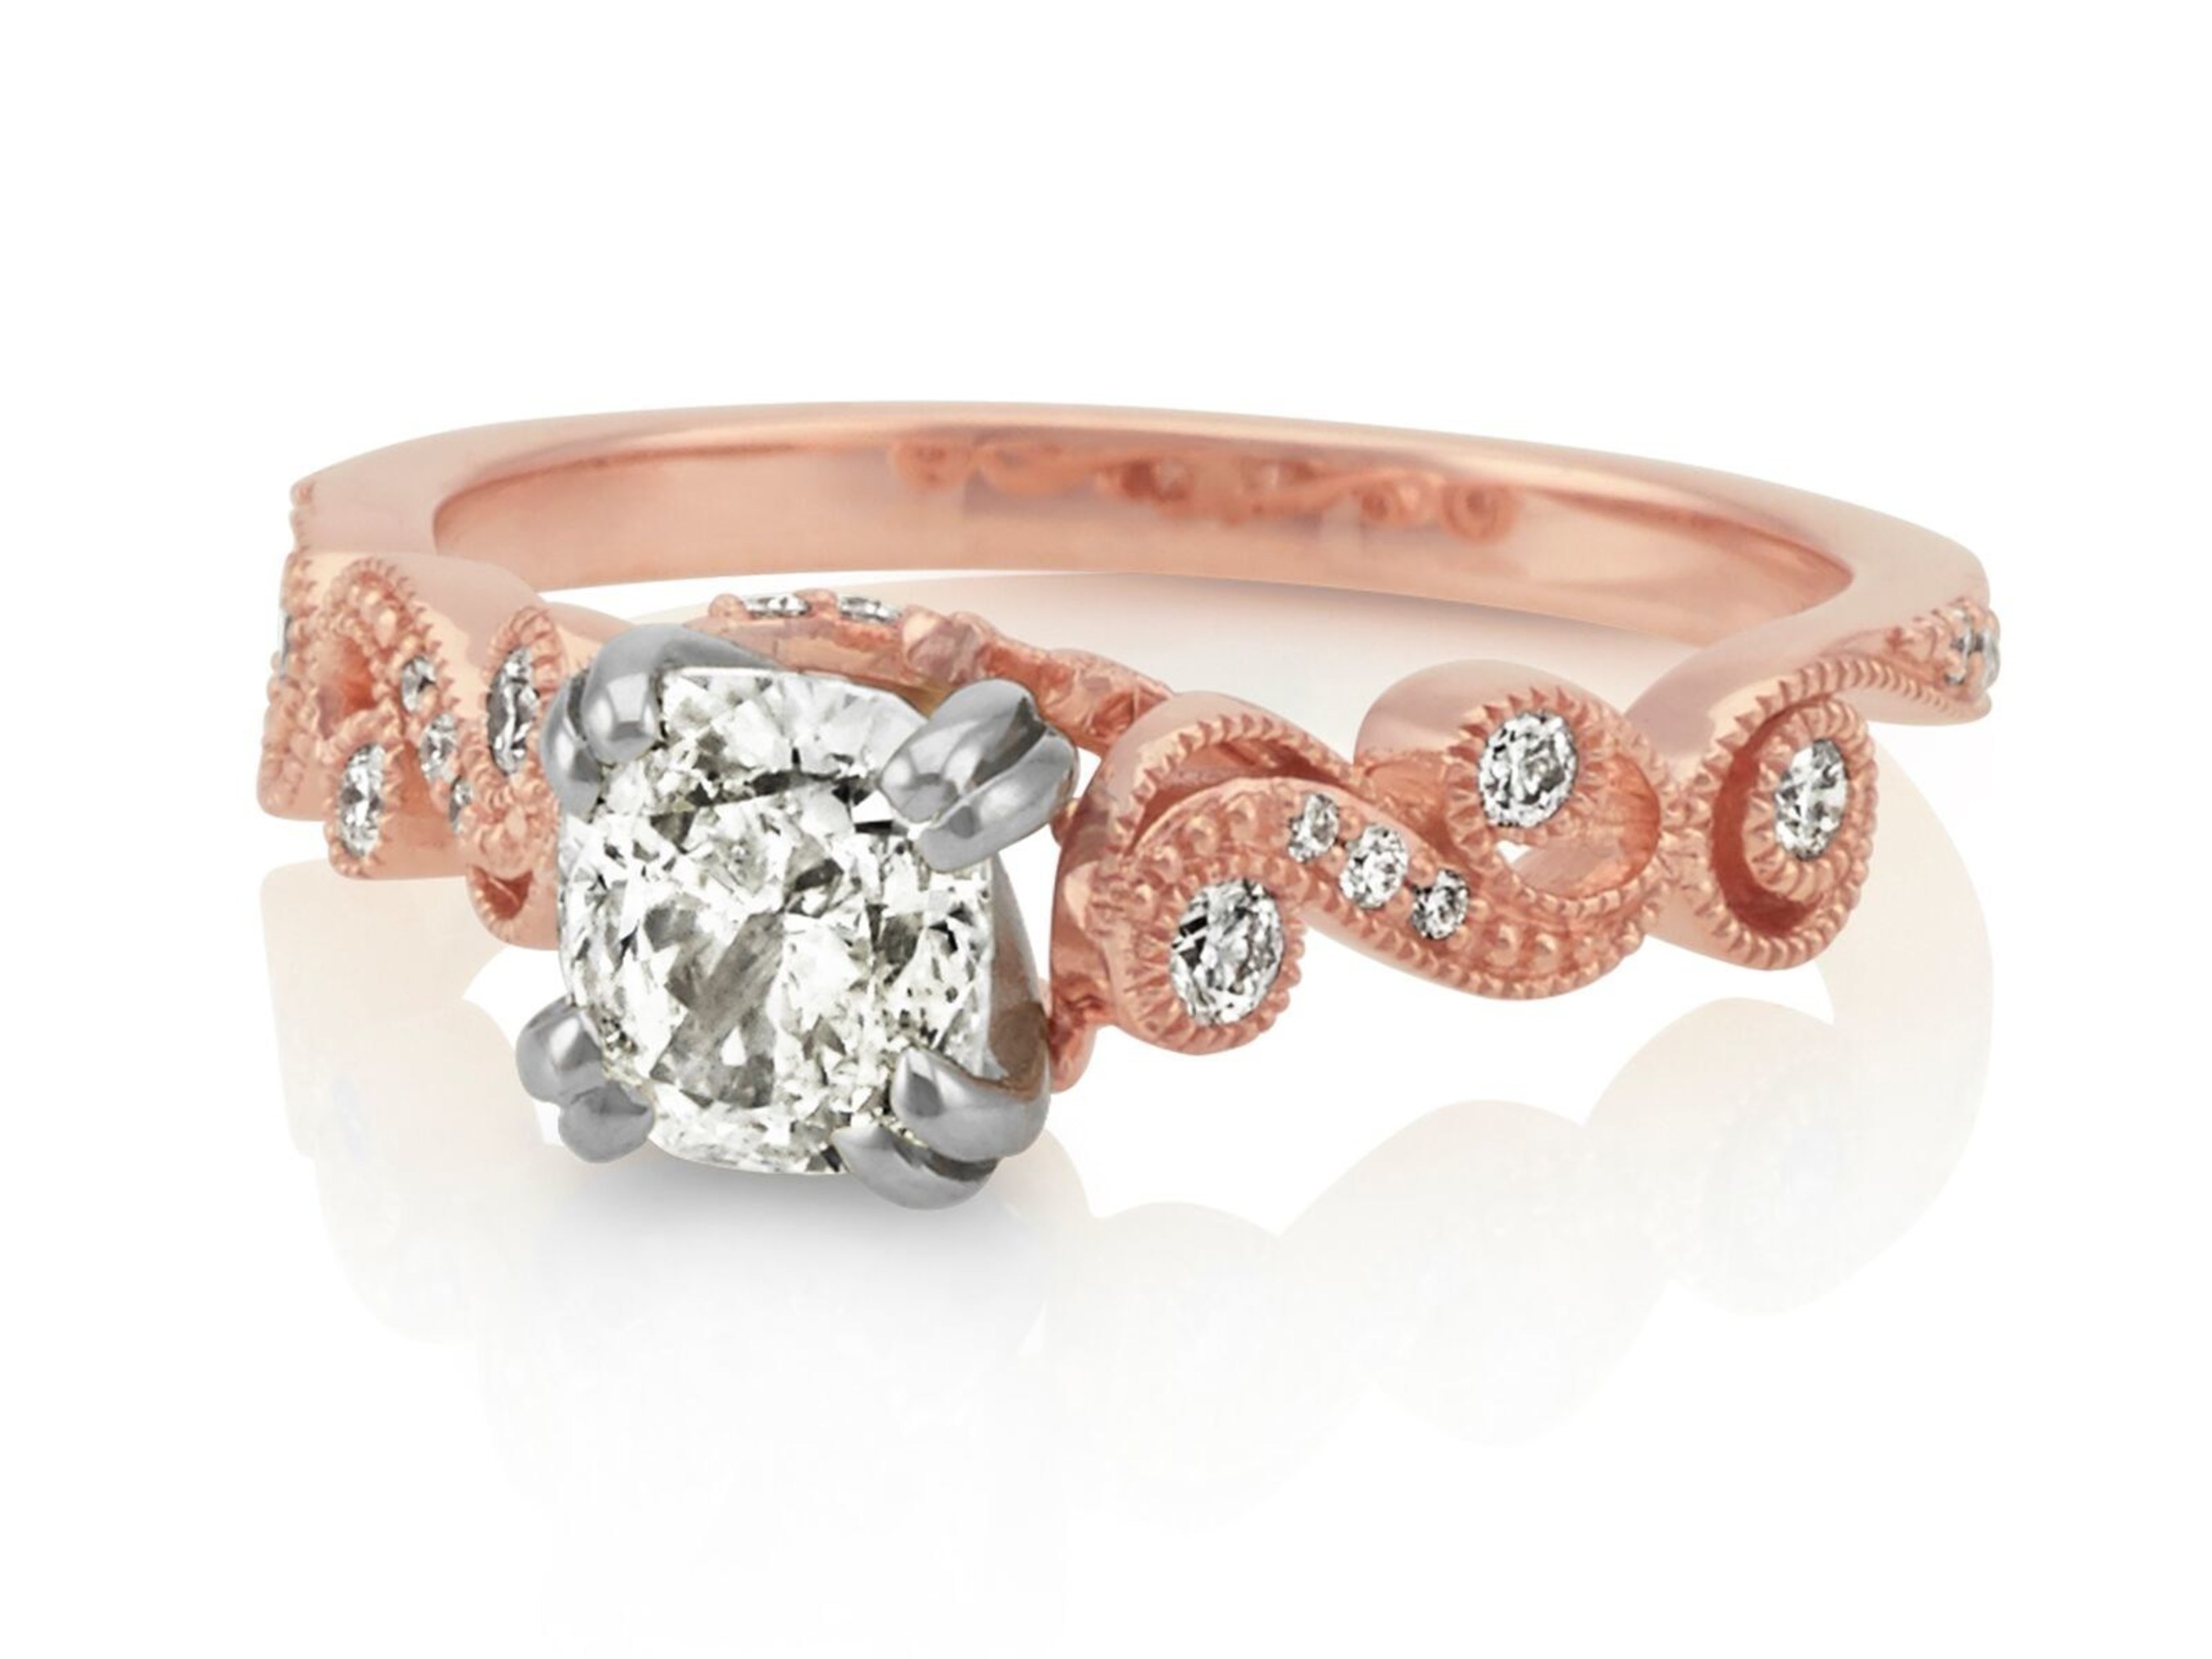 Shane Co. Rose Gold Engagement Ring with Round Center Diamond - Seven Engagement Rings Christmas 2016 (Article number 41076407)